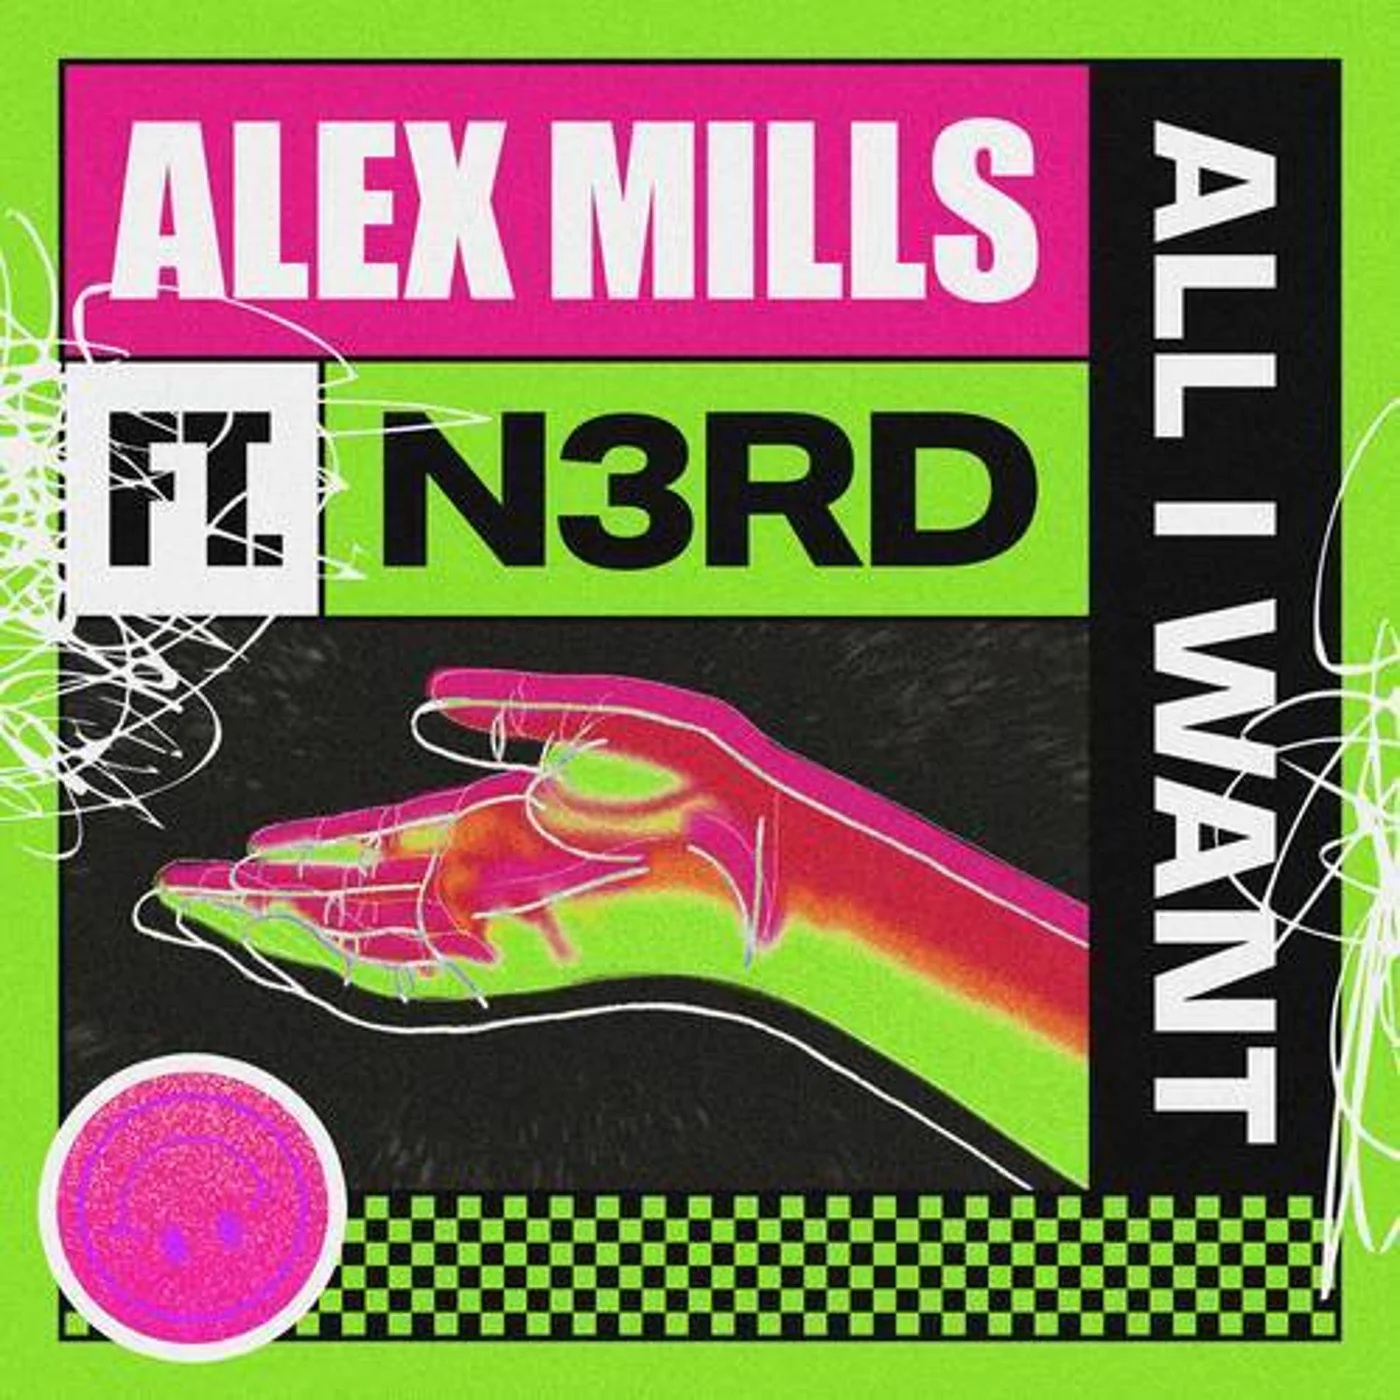 Alex Mills featuring N3RD — All I Want cover artwork